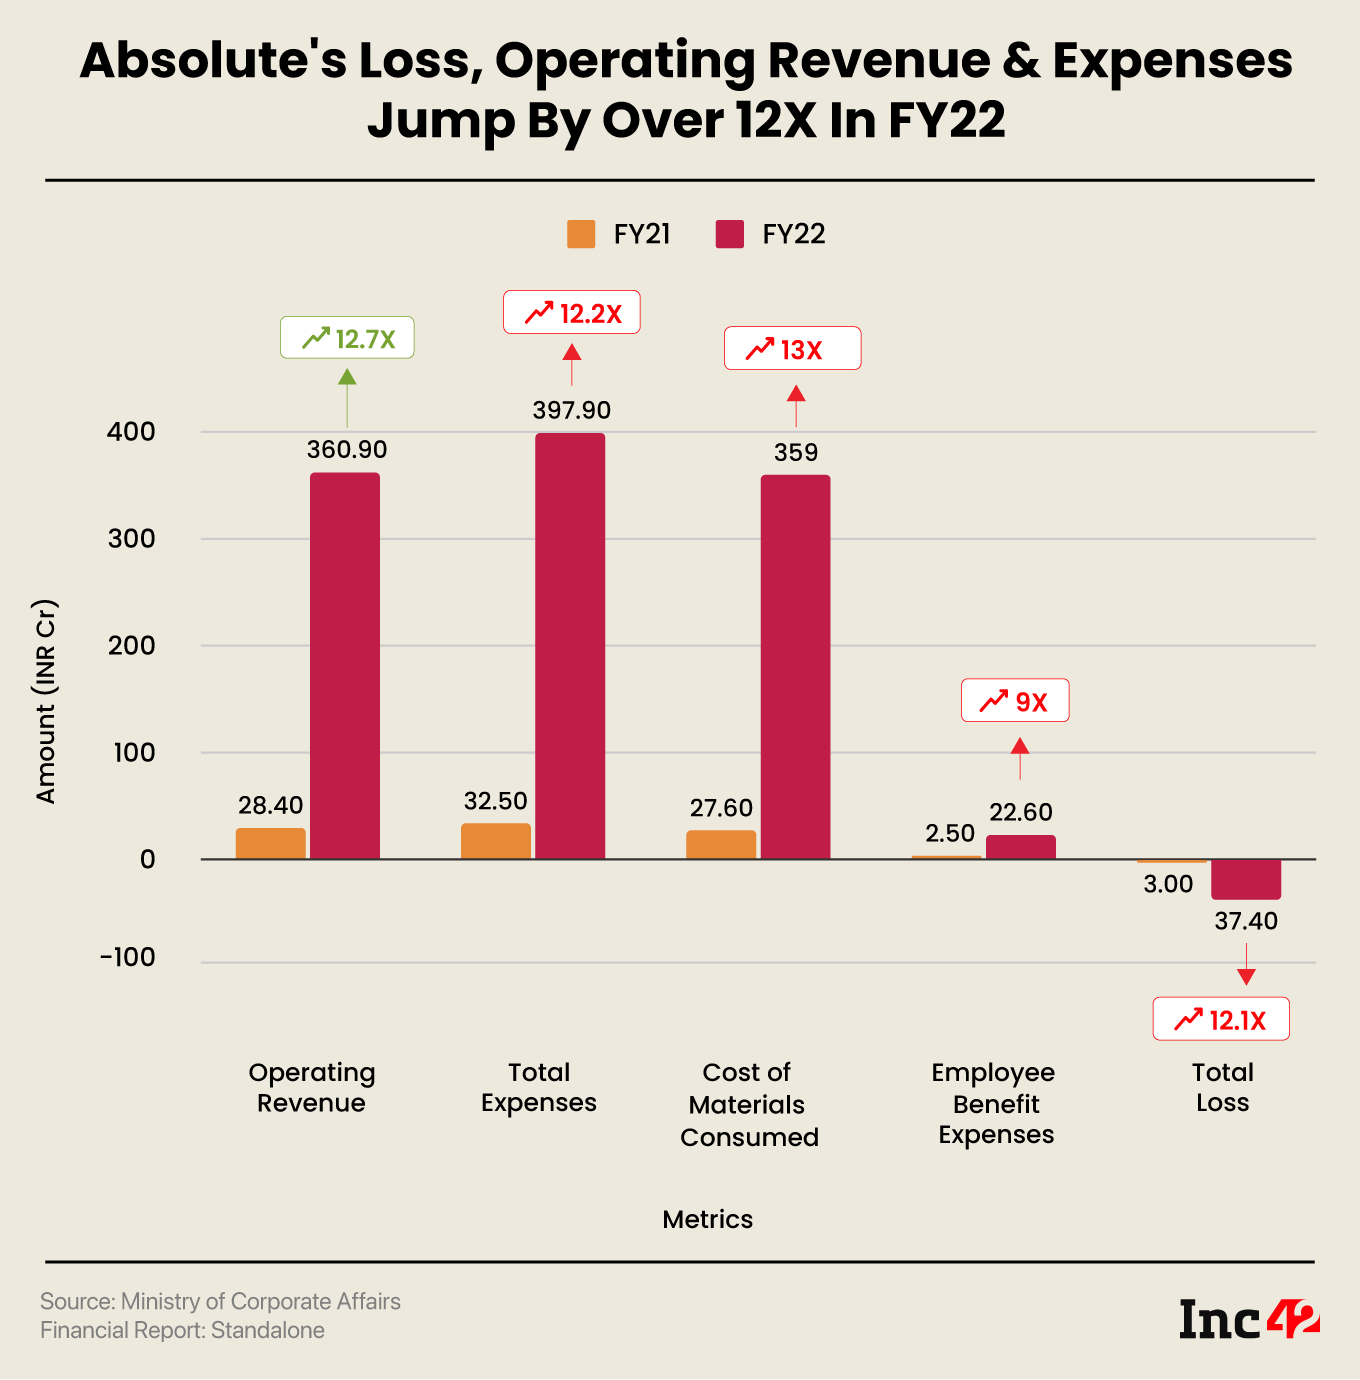 Absolute's Loss, Operating Revenue & Expenses Jump By Over 12X In FY22 